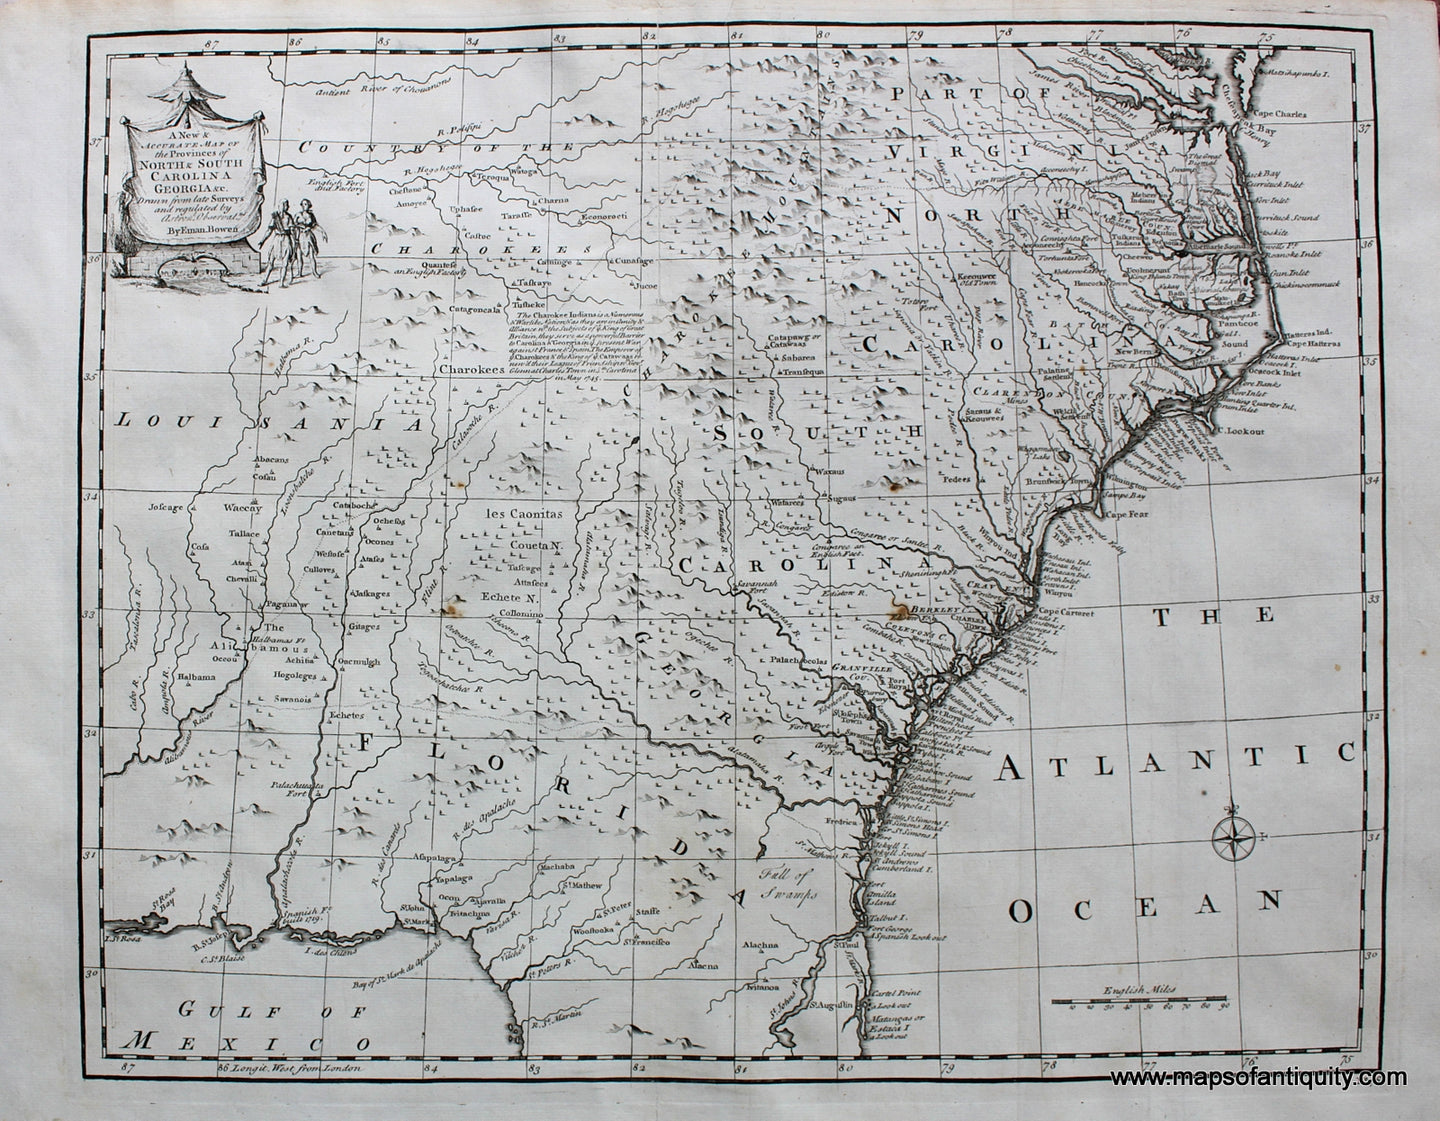 Black-and-White-Engraved-Antique-Map-A-New-and-Accurate-Map-of-the-Provinces-of-North-and-South-Carolina-Georgia-etc.-by-Emmanuel-Bowen-**********-United-States-South-1747-Bowen-Maps-Of-Antiquity